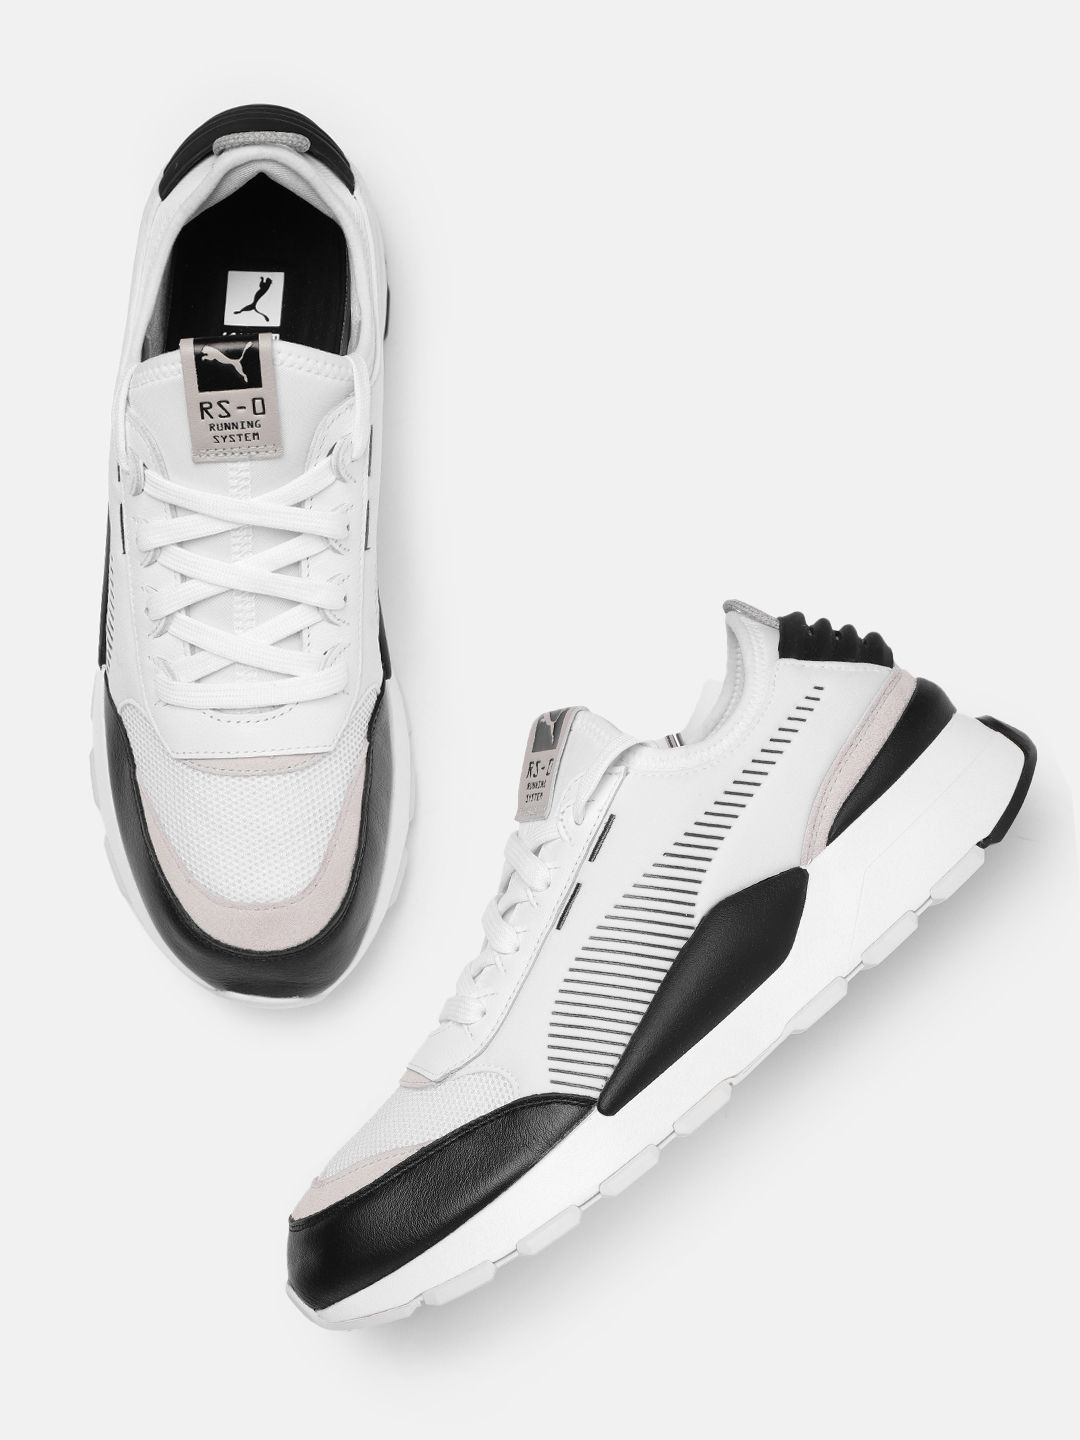 Puma Unisex White RS-0 Core Striped Sneakers Price in India